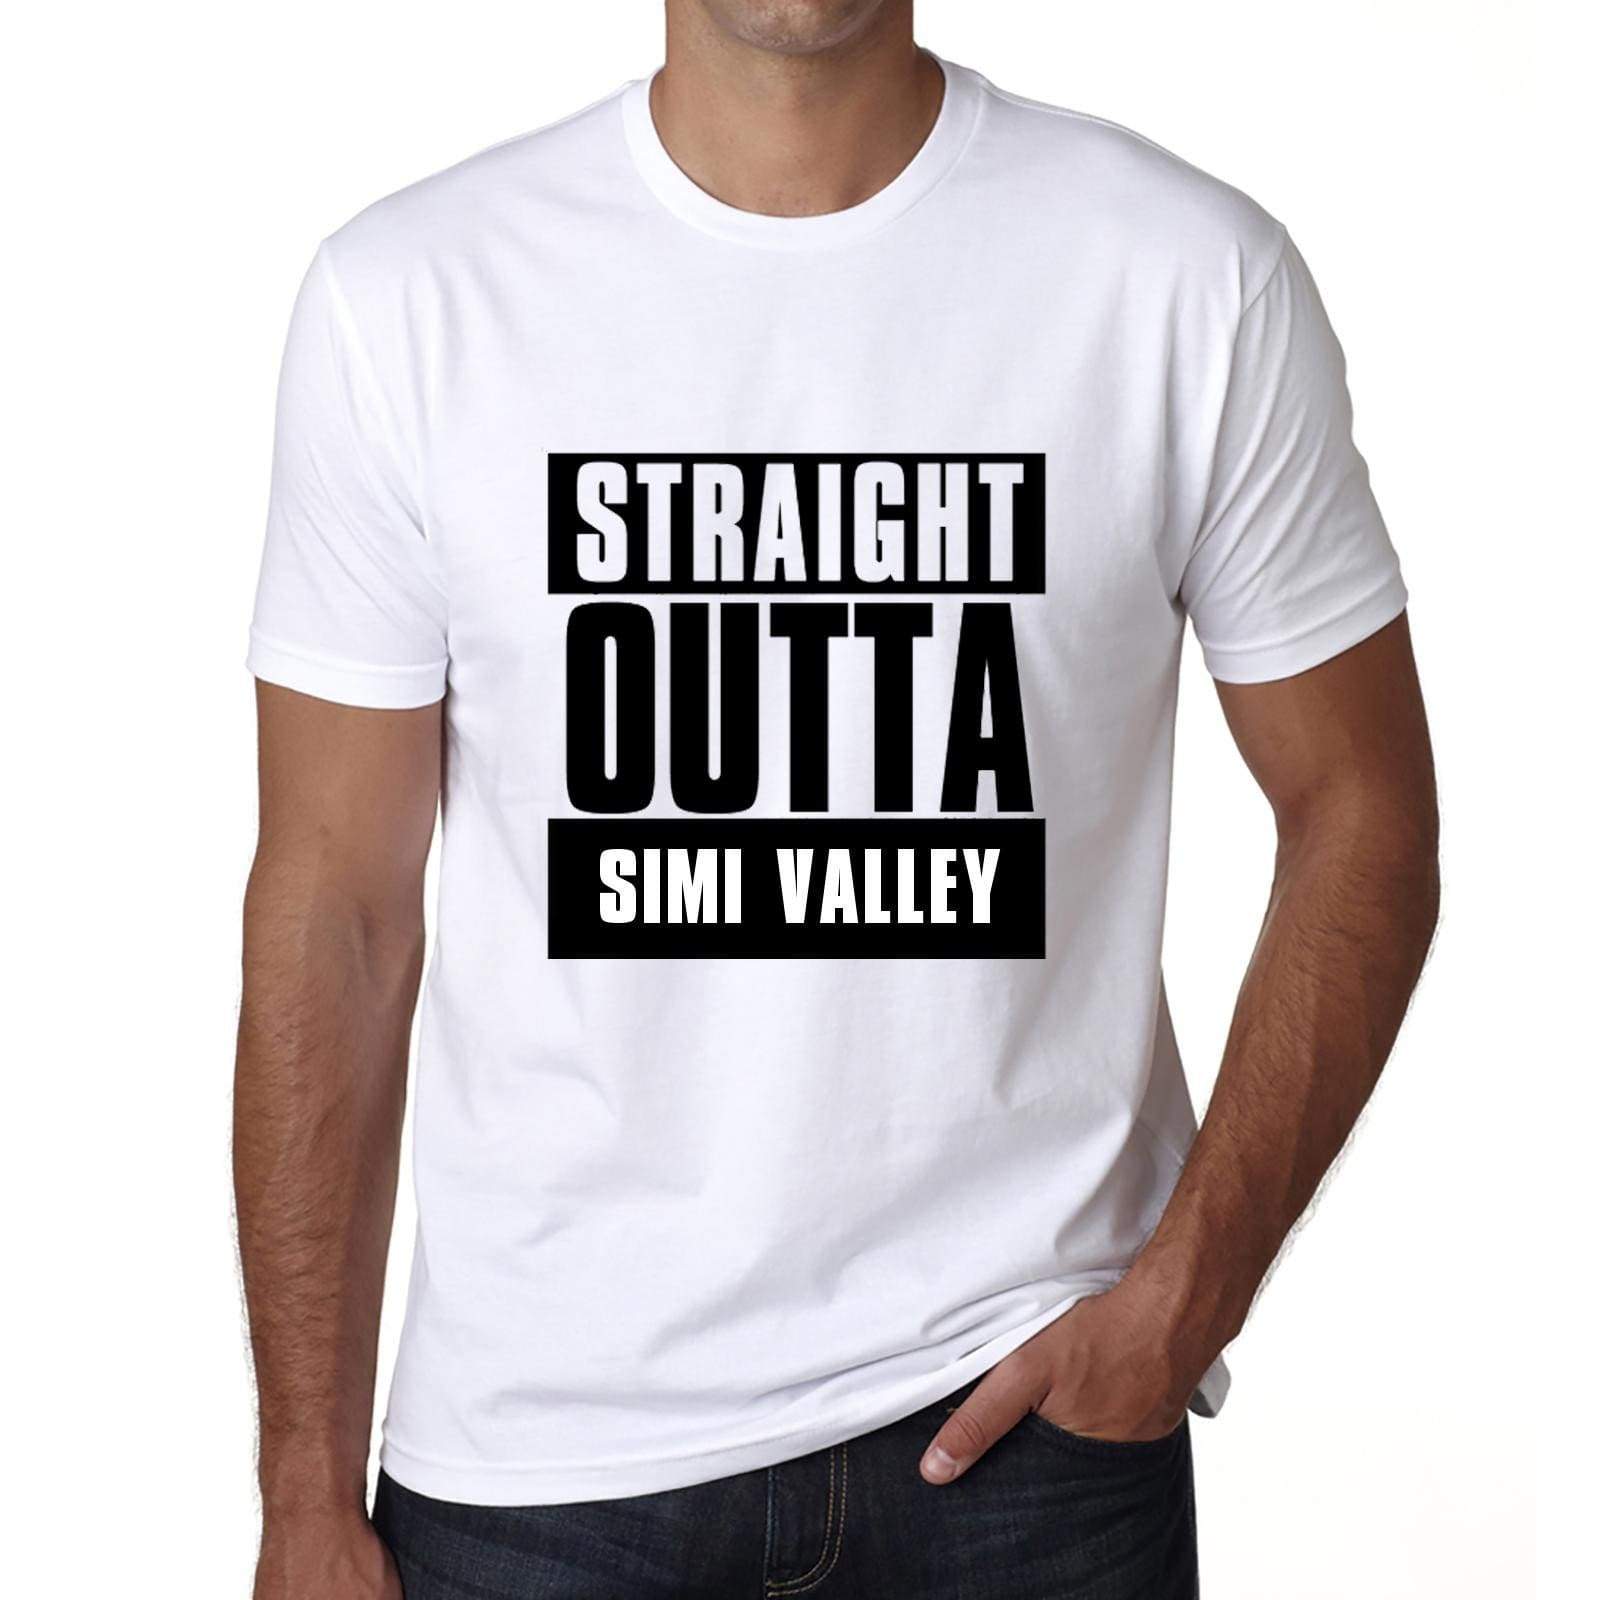 Straight Outta Simi Valley Mens Short Sleeve Round Neck T-Shirt 00027 - White / S - Casual